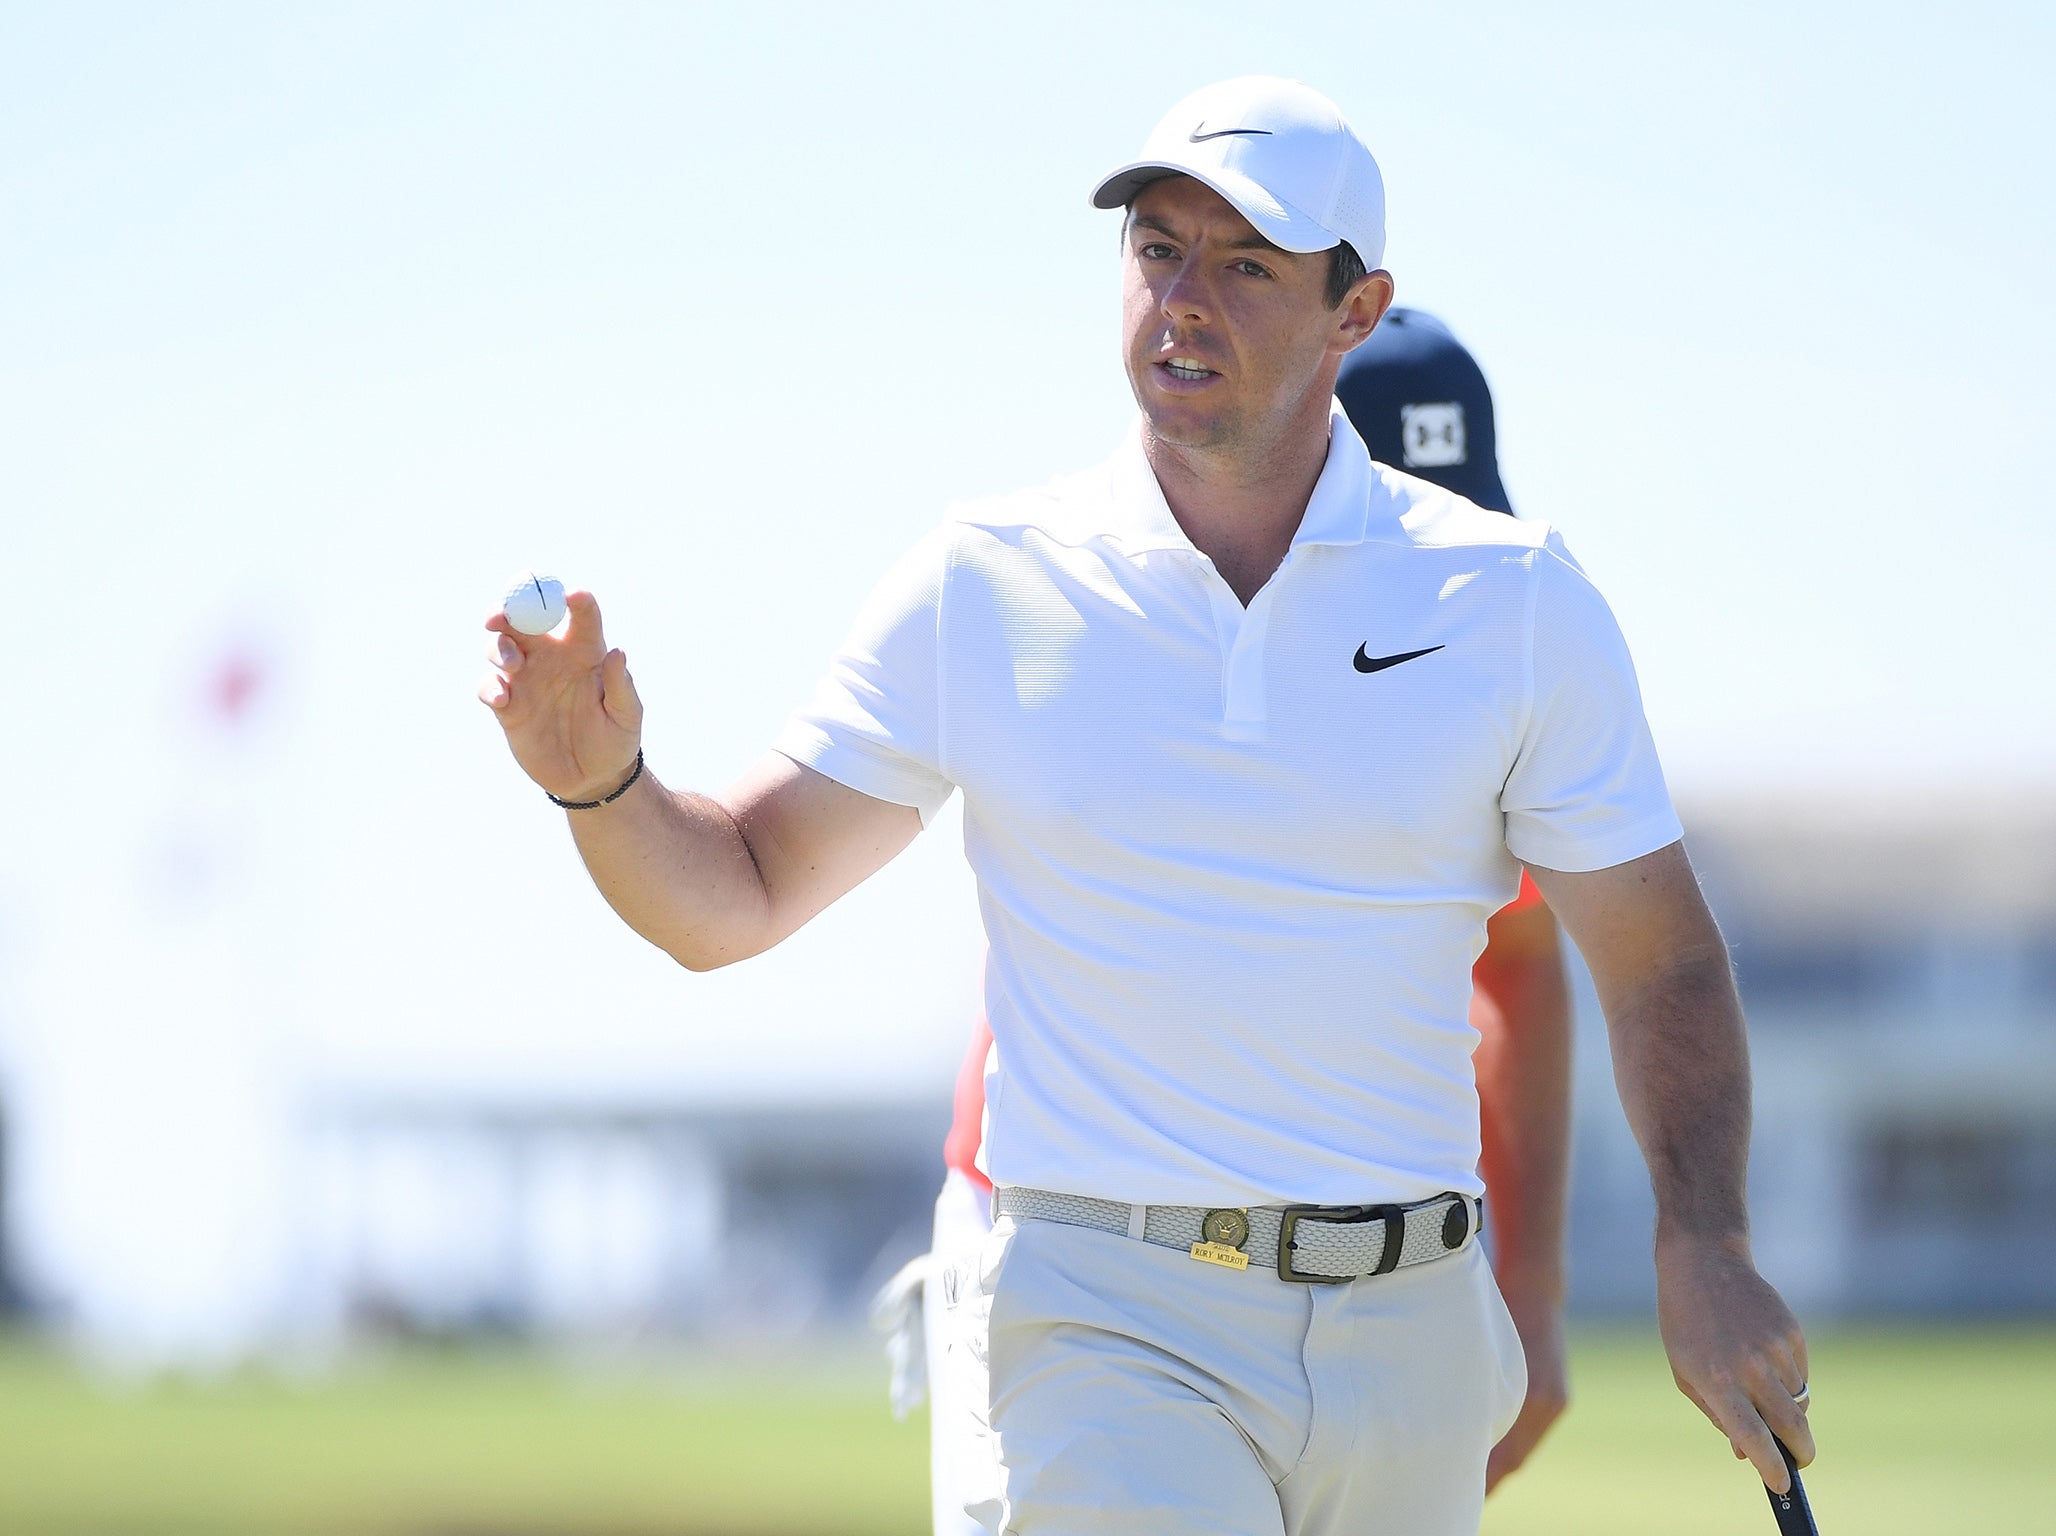 Rory McIlroy had a round to forget